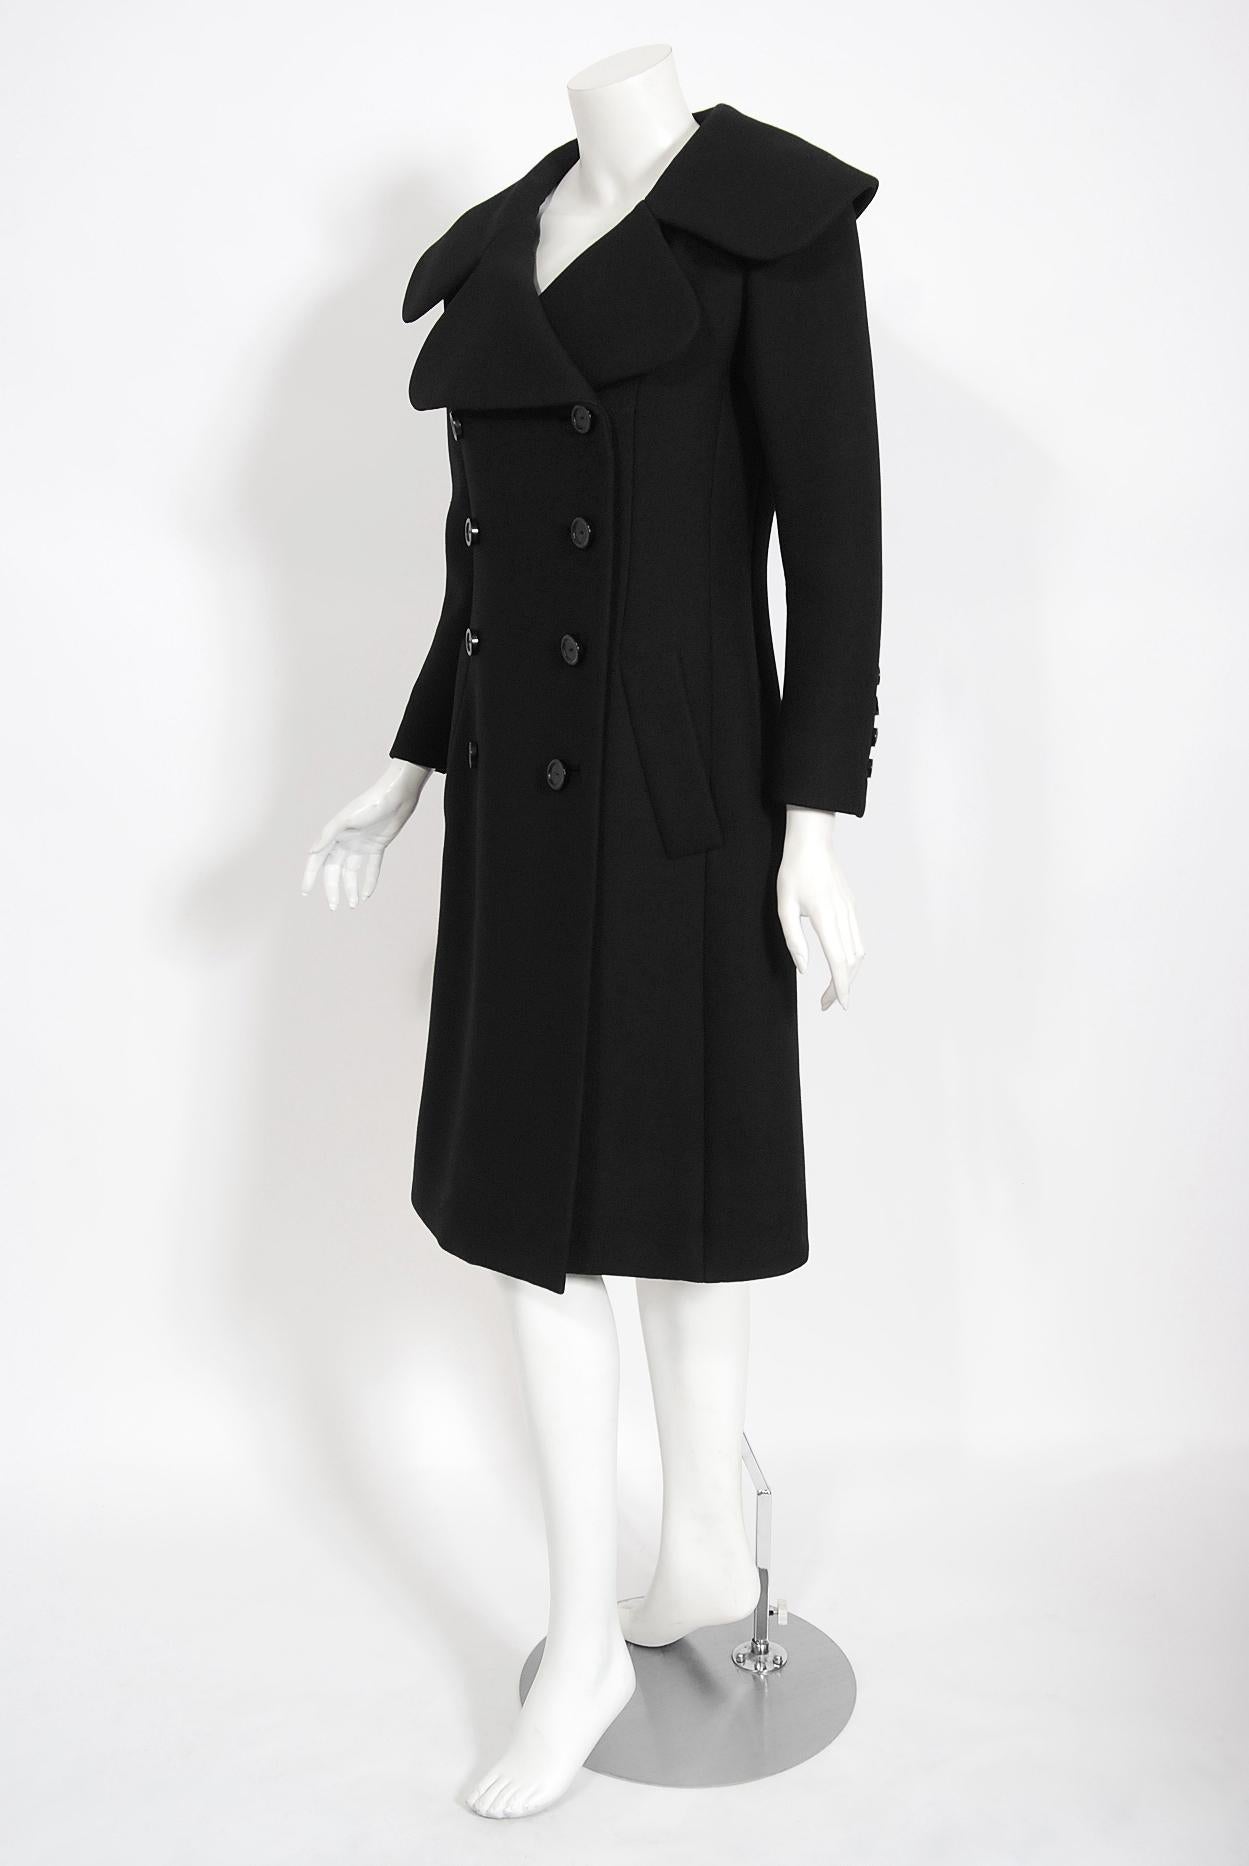 Women's Vintage 1968 Norman Norell Black Wool Over-Sized Collar Double Breasted Mod Coat